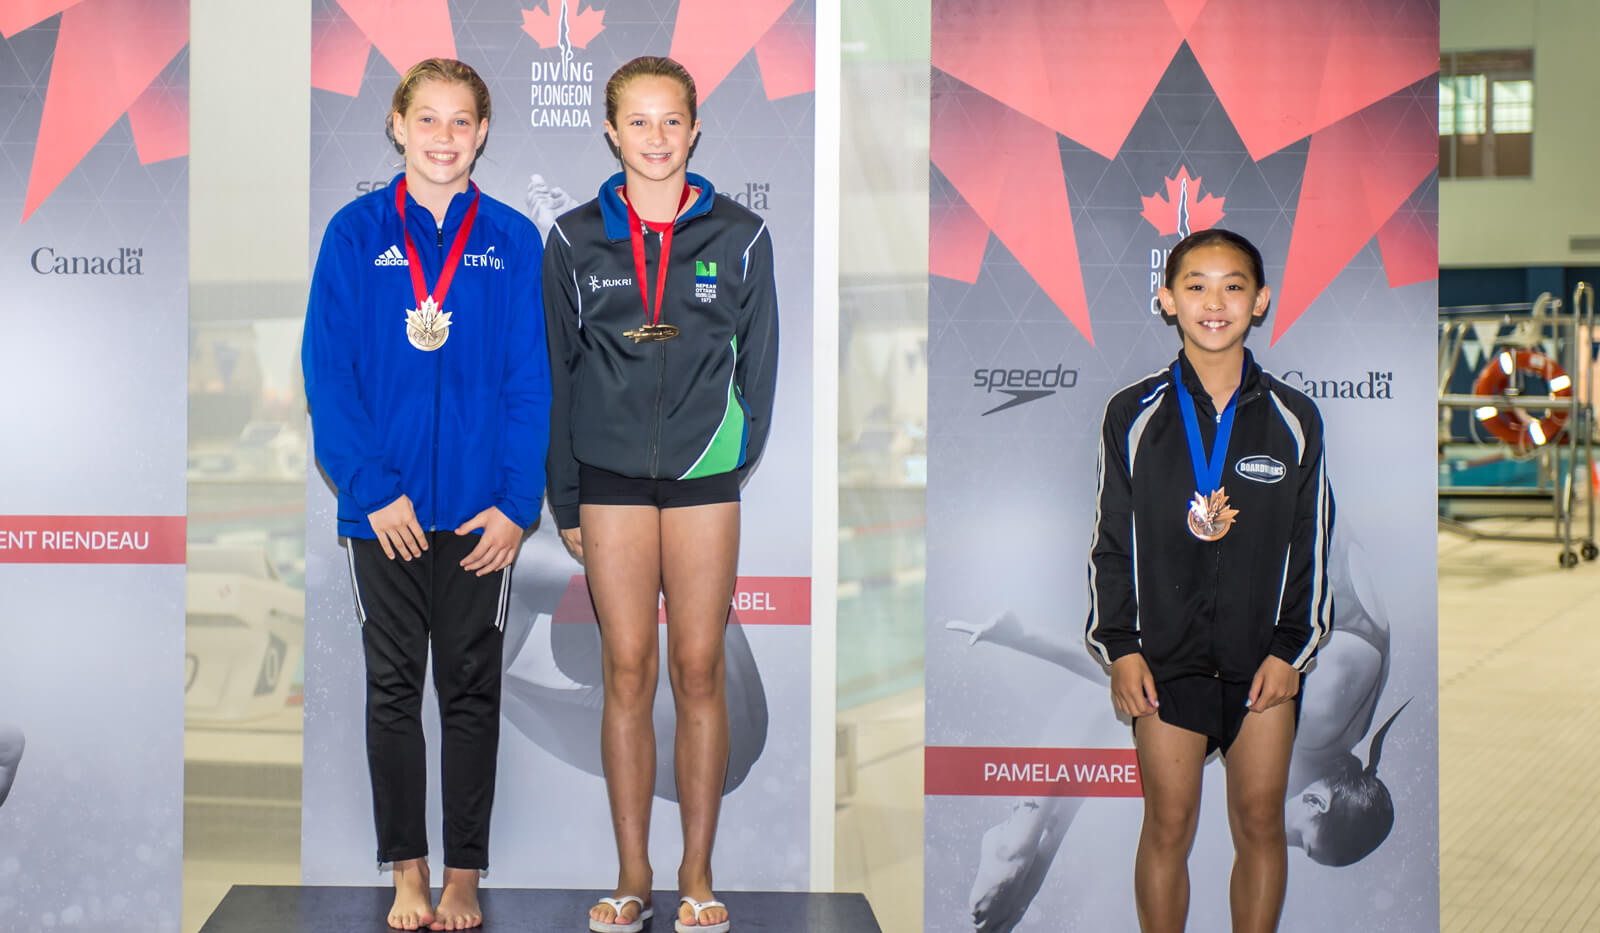 Miller and Legault tie for first place at 2018 Speedo Junior Development Nationals